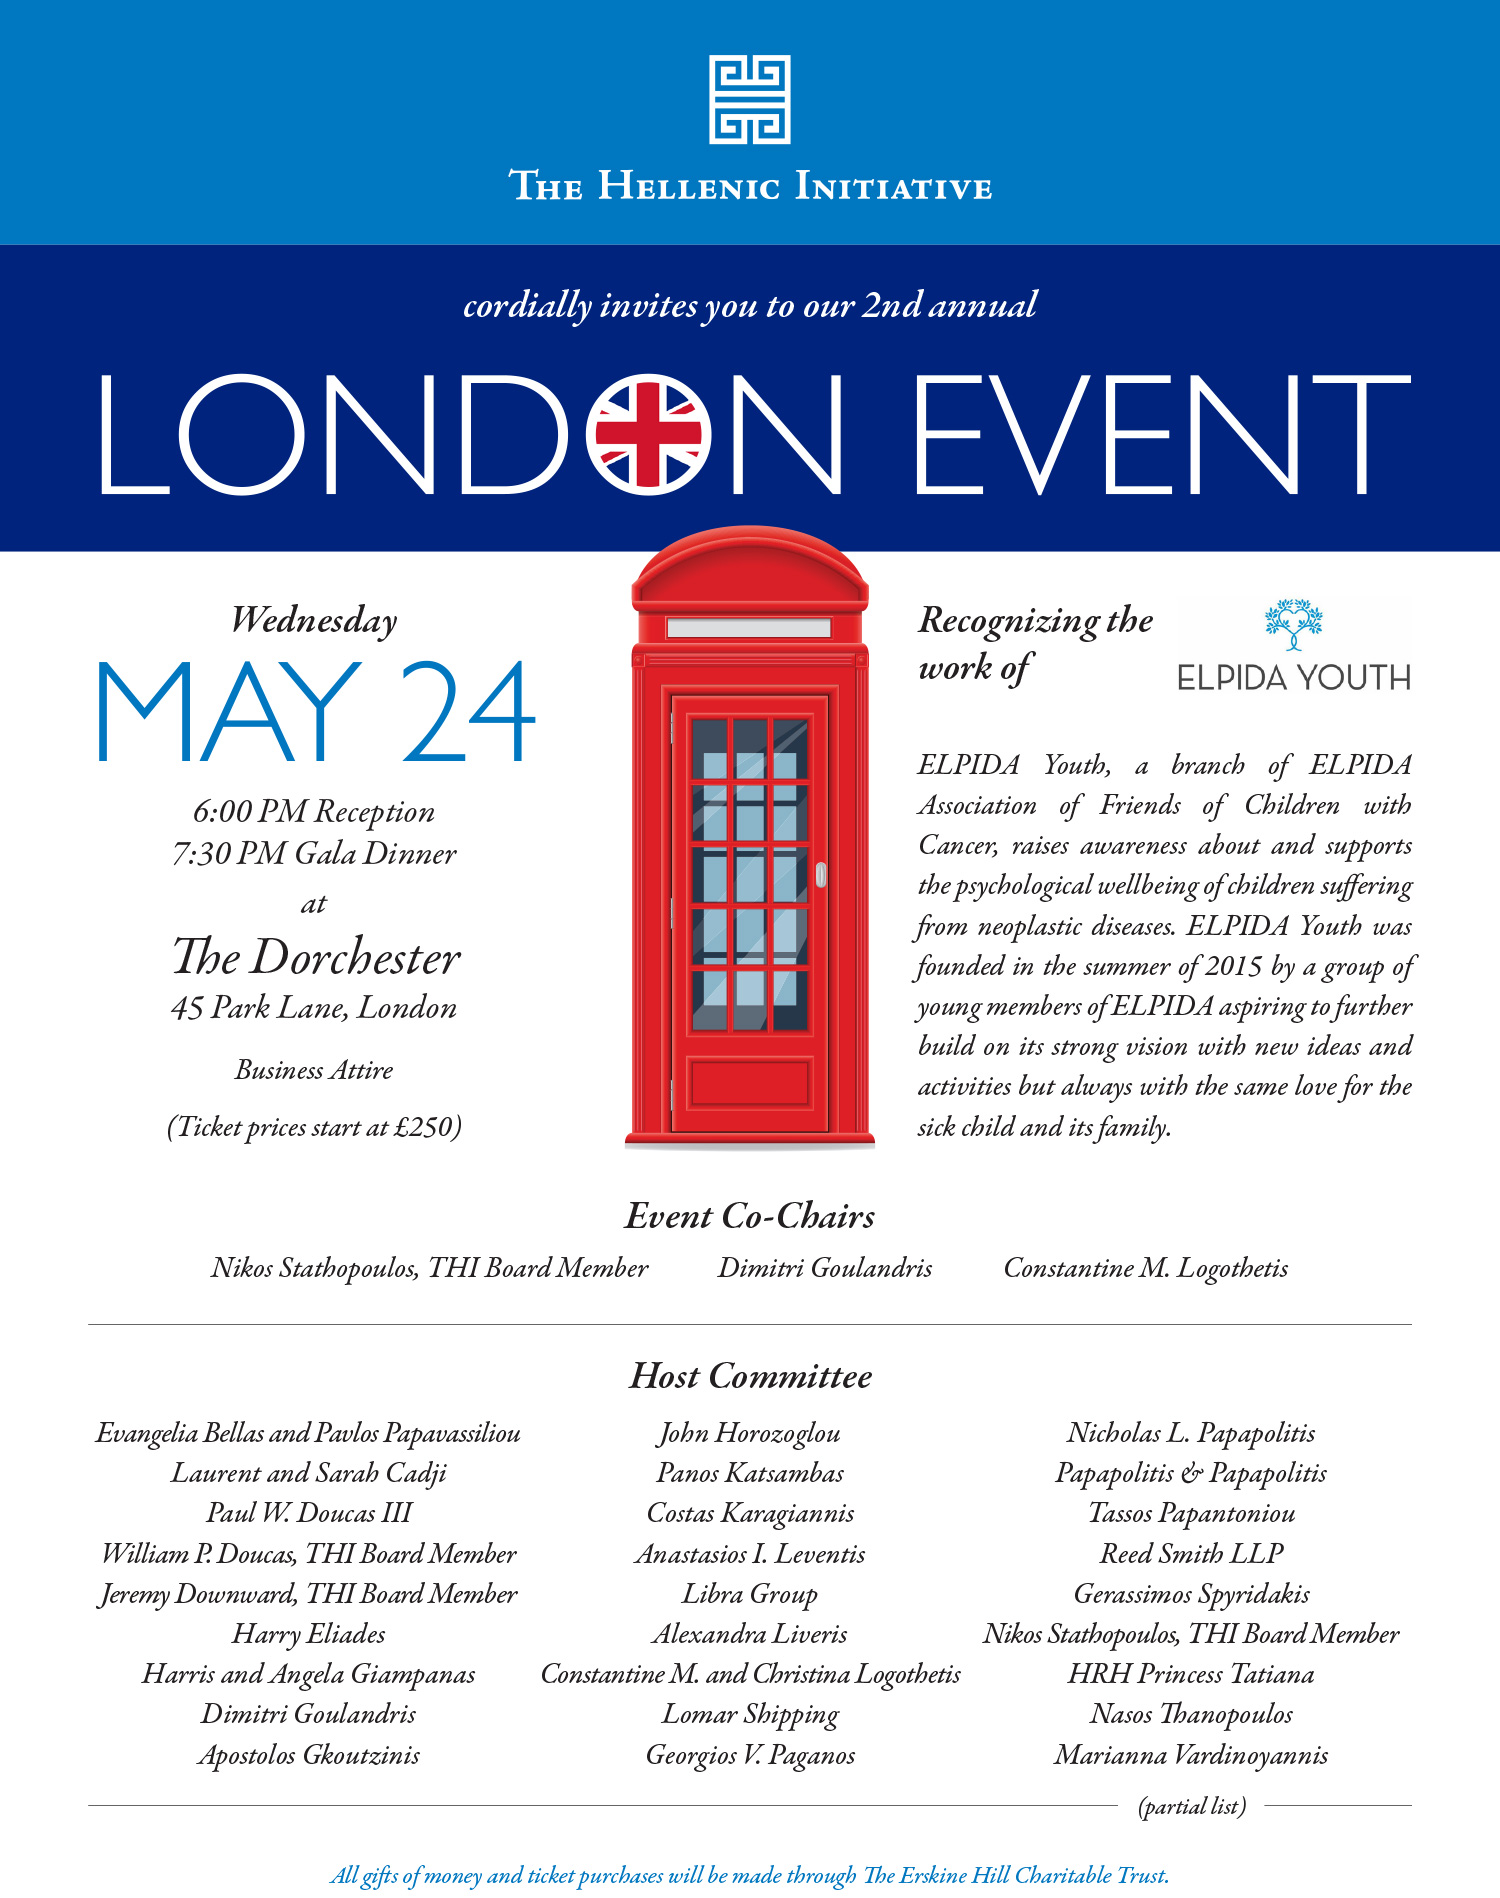 THI 2nd Annual London Event. Recognizing the work of ELPIDA Youth.